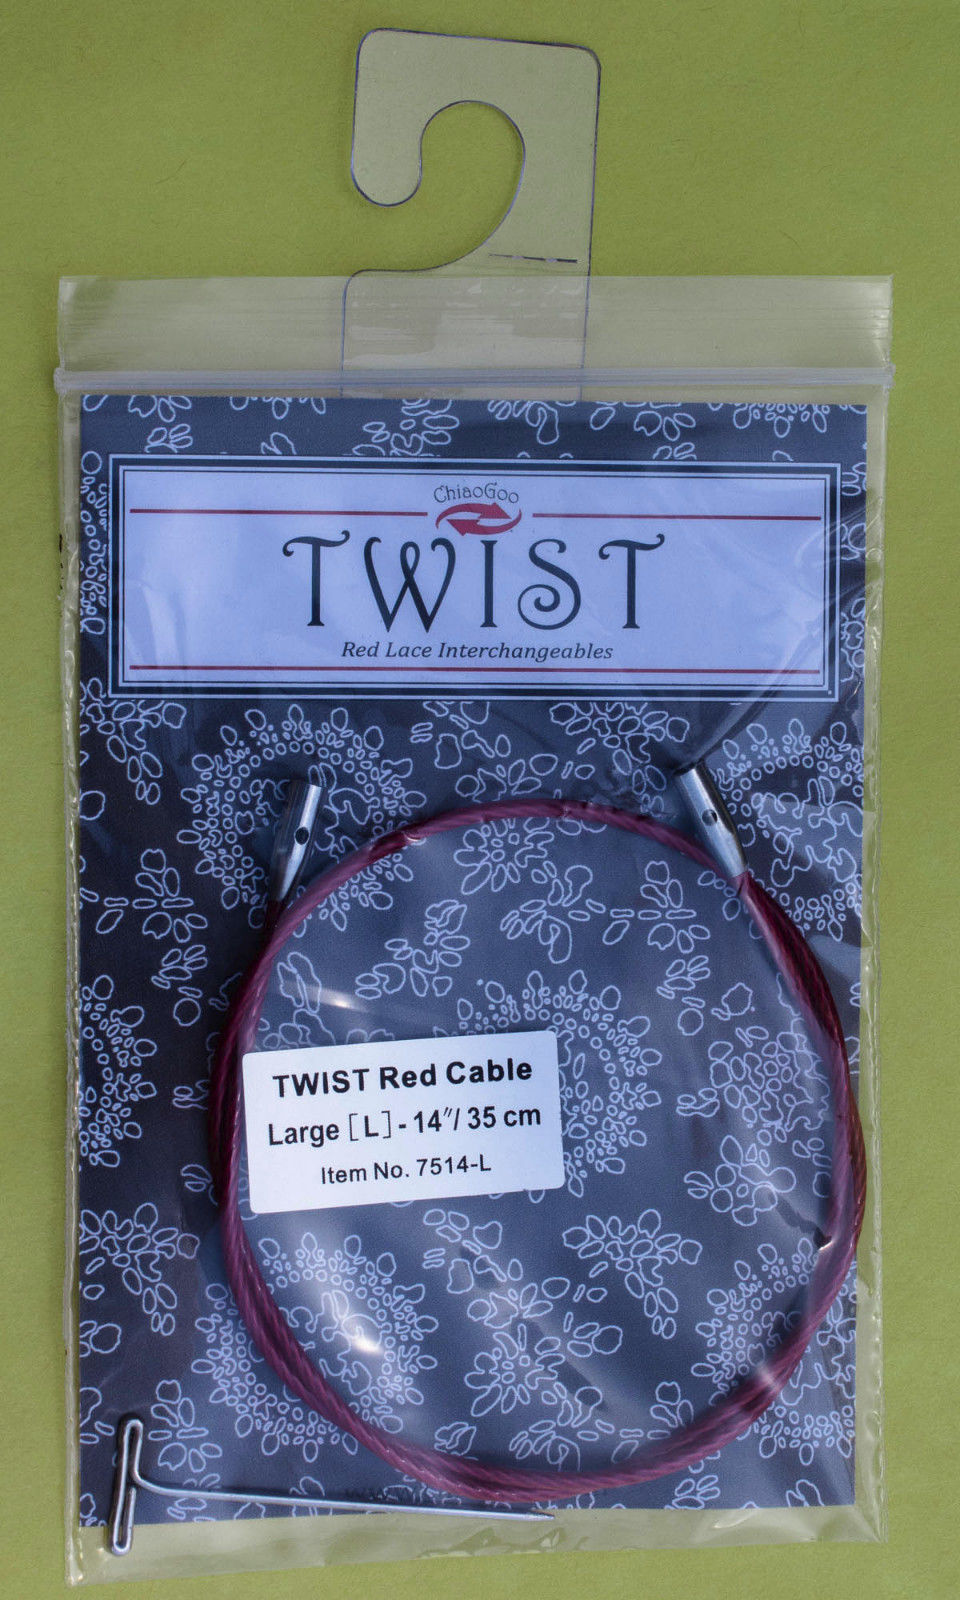 ChiaoGoo Cable with Key for TWIST Red Lace Interchangeable